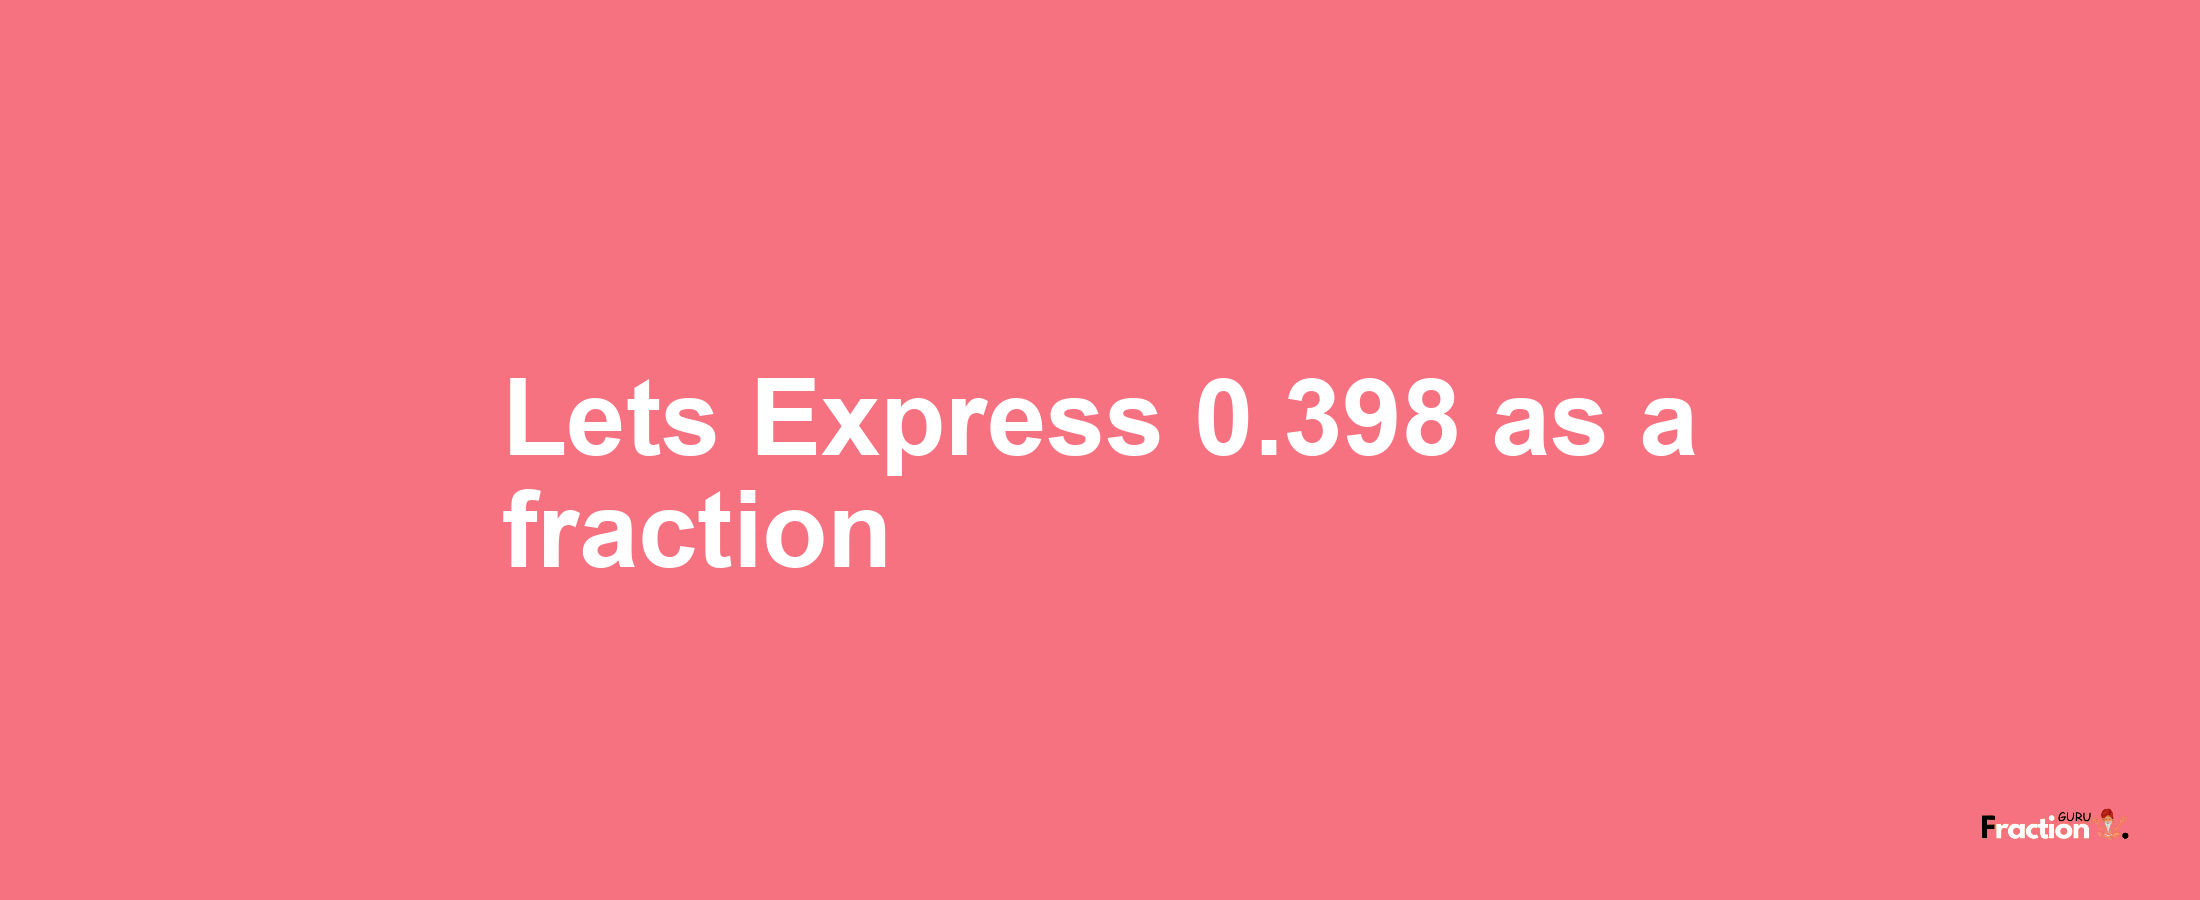 Lets Express 0.398 as afraction